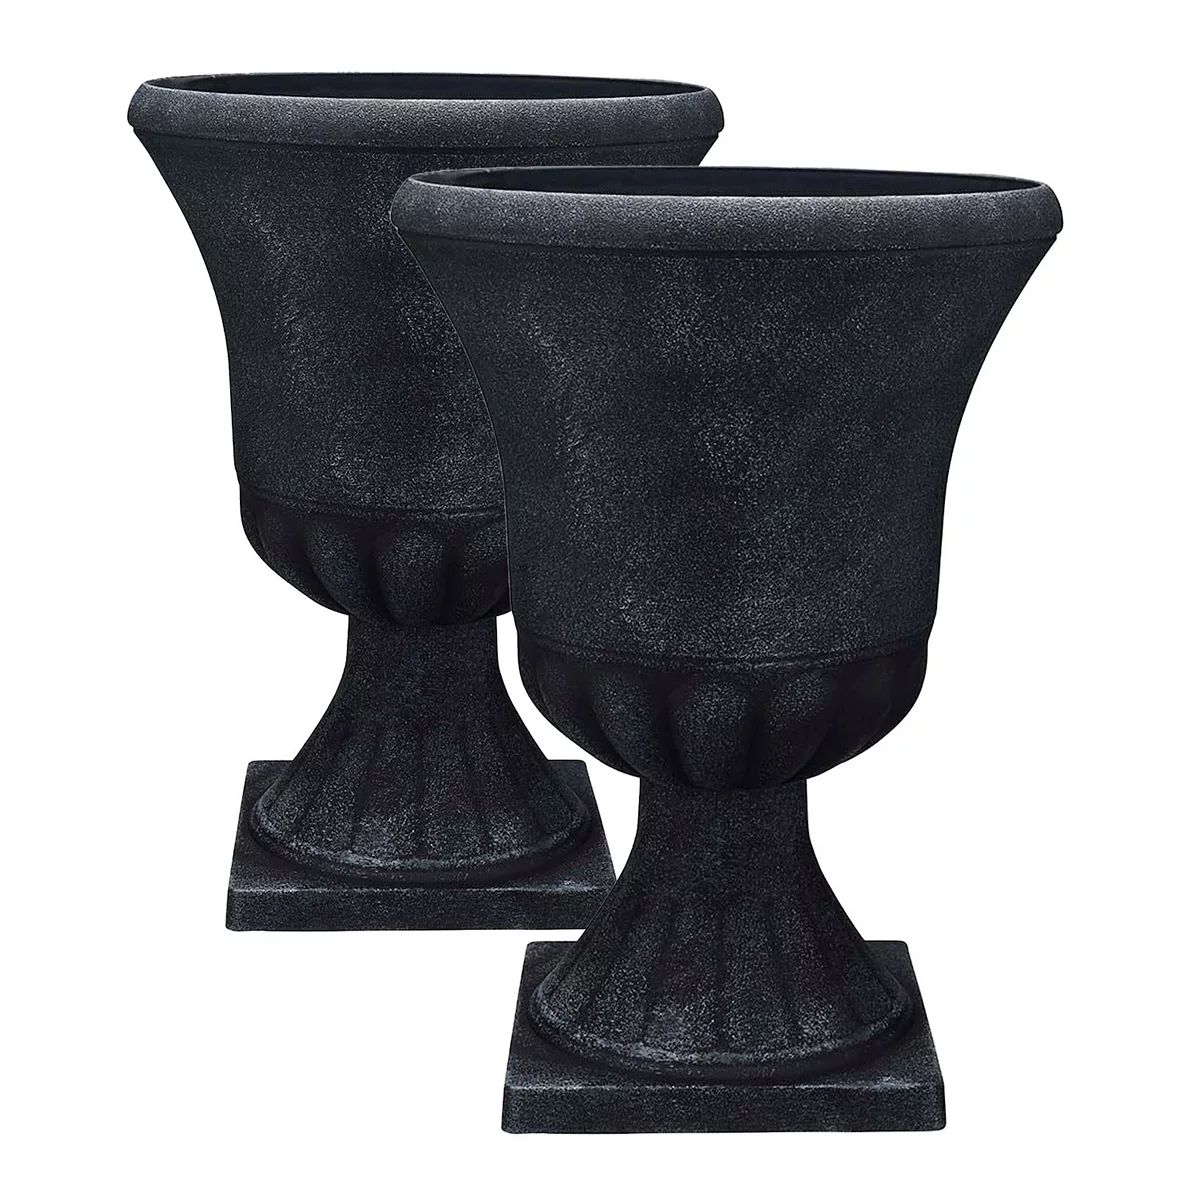 Southern Patio EB-029816 Winston 16 Inch Resin Outdoor Planter, Black (2 Pack) | Kohl's